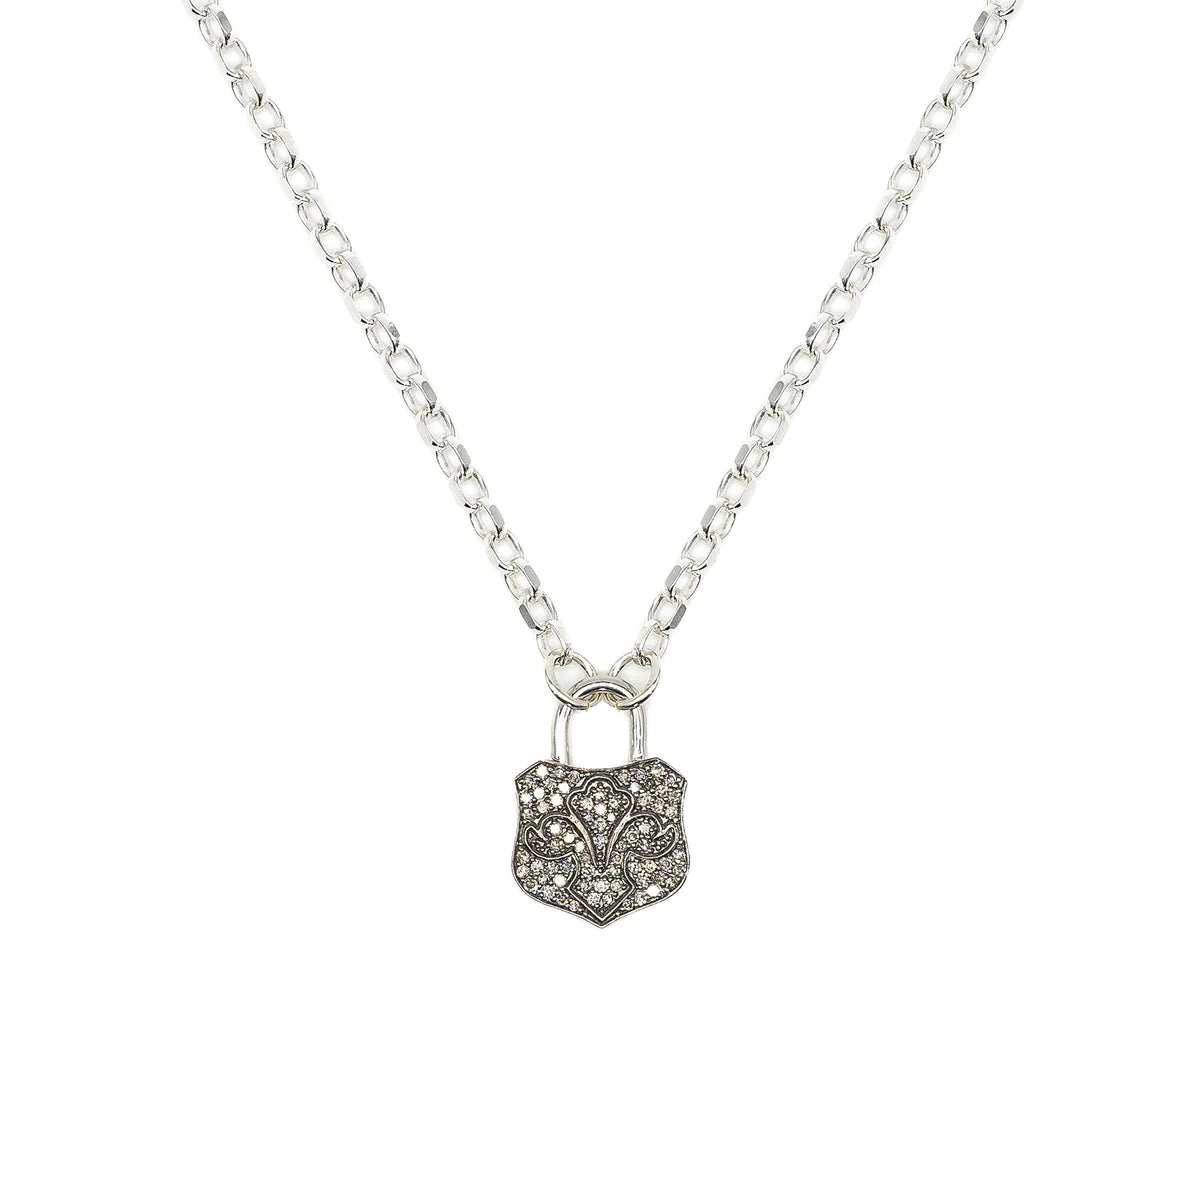 Sterling silver chain with pave diamonds and sterling silver lock pendant